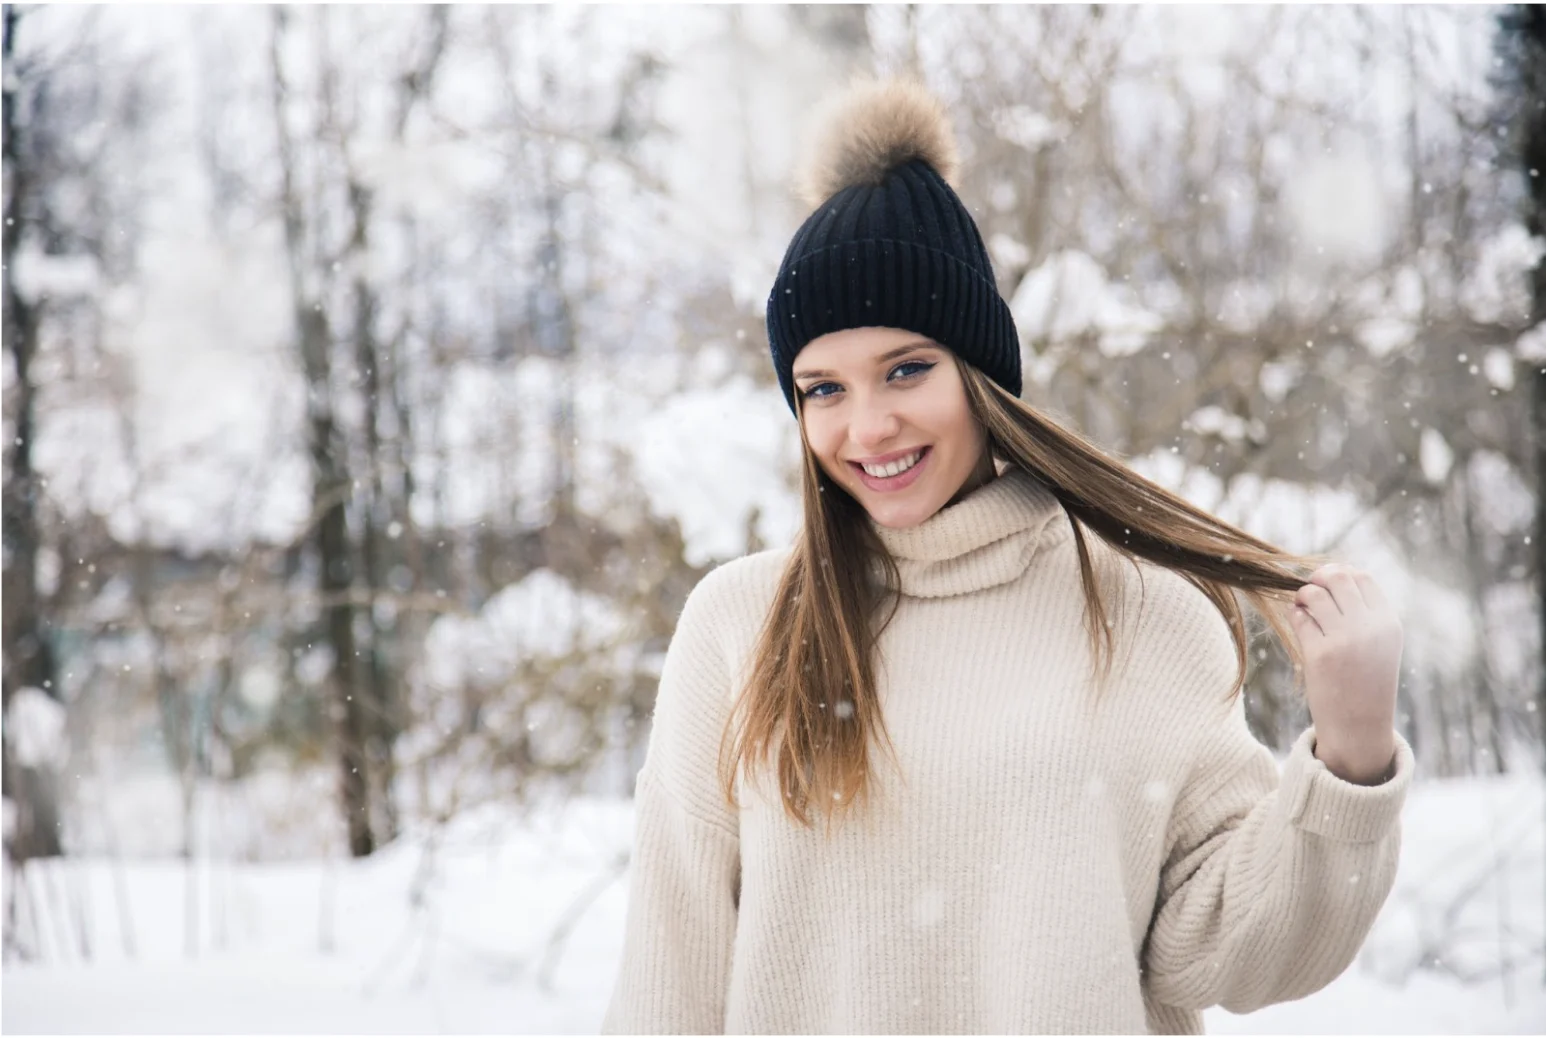 Getty Images: Wearing a hat during winter can help protect your hair from damage